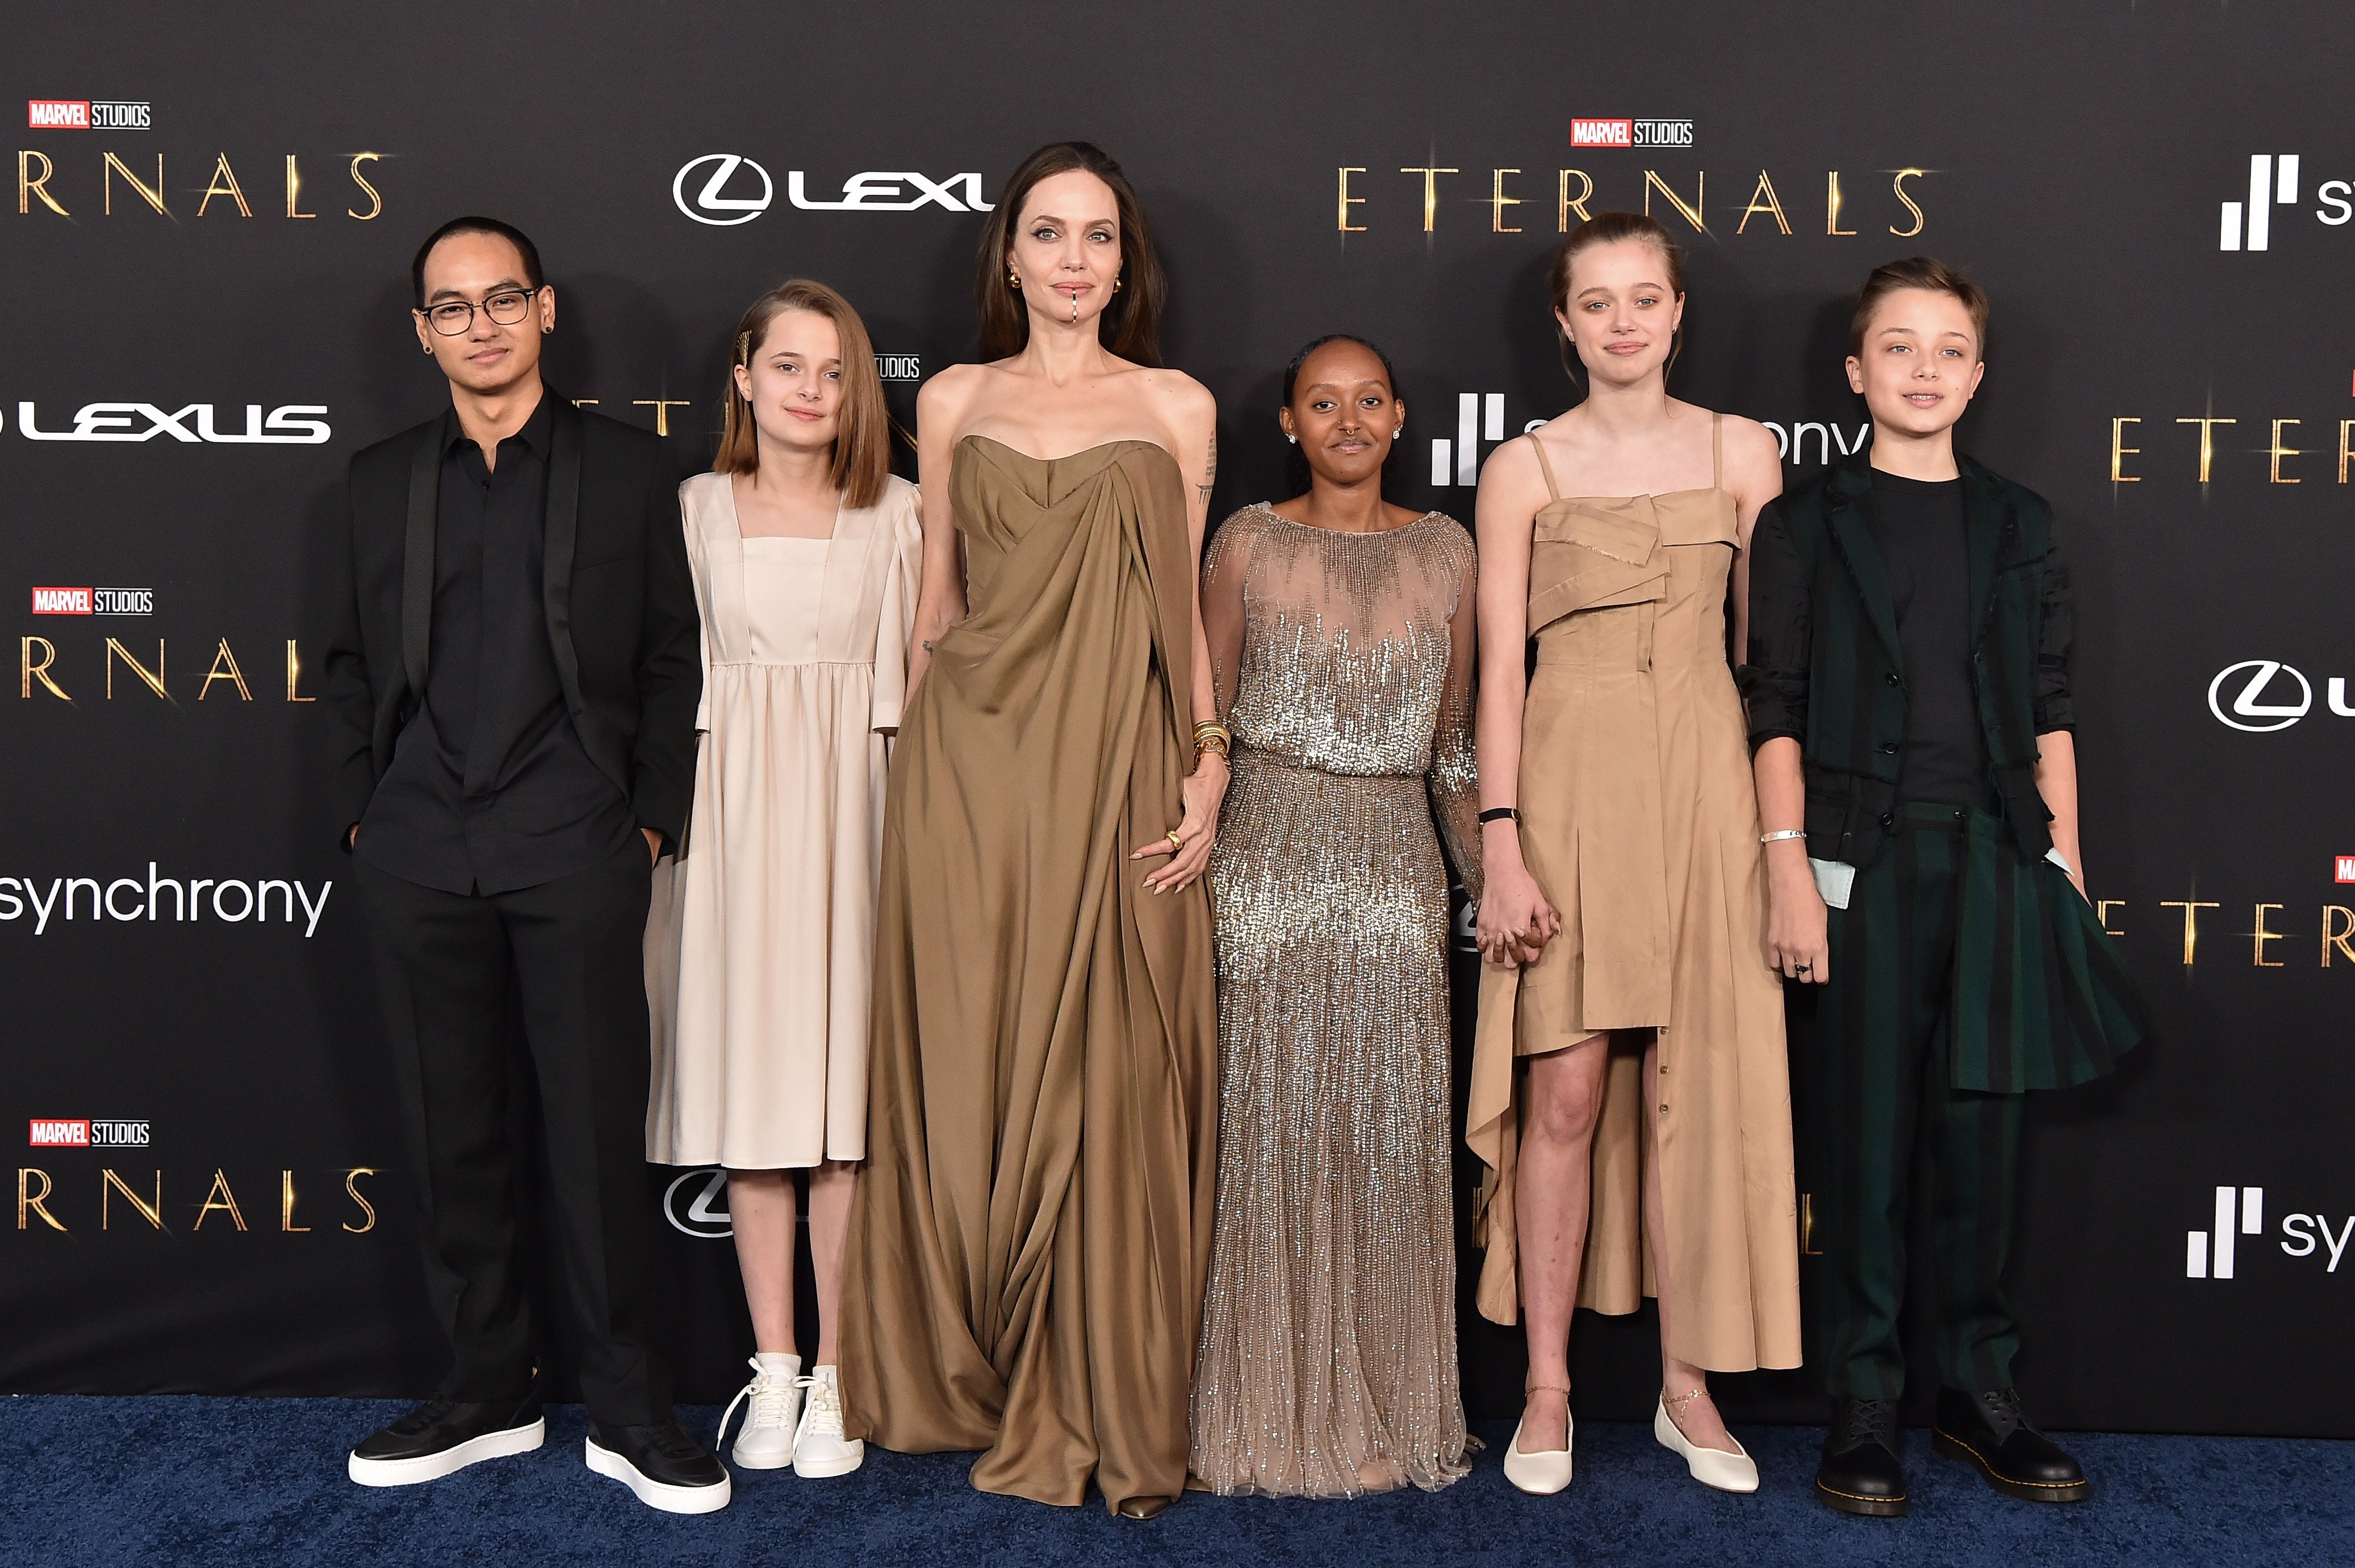 Maddox, Vivienne, Angelina Jolie, Knox, Shiloh,, and Zahara Jolie-Pitt attend the Los Angeles Premiere of Marvel Studios' "Eternals" on October 18, 2021 in Los Angeles, California. | Source: Getty Images